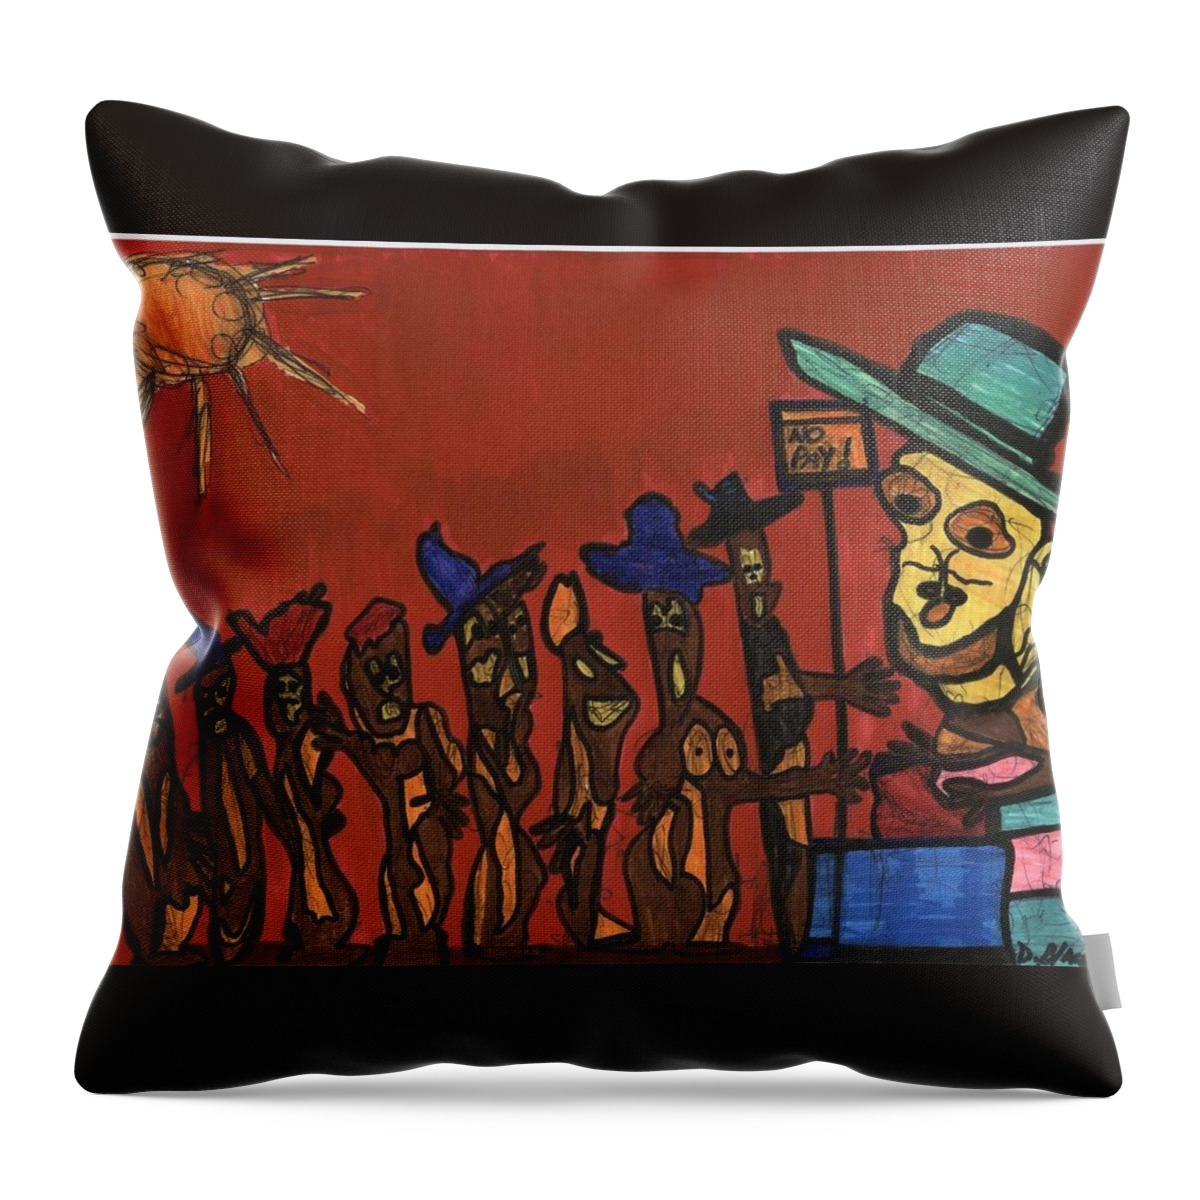 Multicultural Nfprsa Product Review Reviews Marco Social Media Technology Websites \\\\in-d�lj\\\\ Darrell Black Definism Artwork Throw Pillow featuring the drawing Queuing for residuals by Darrell Black